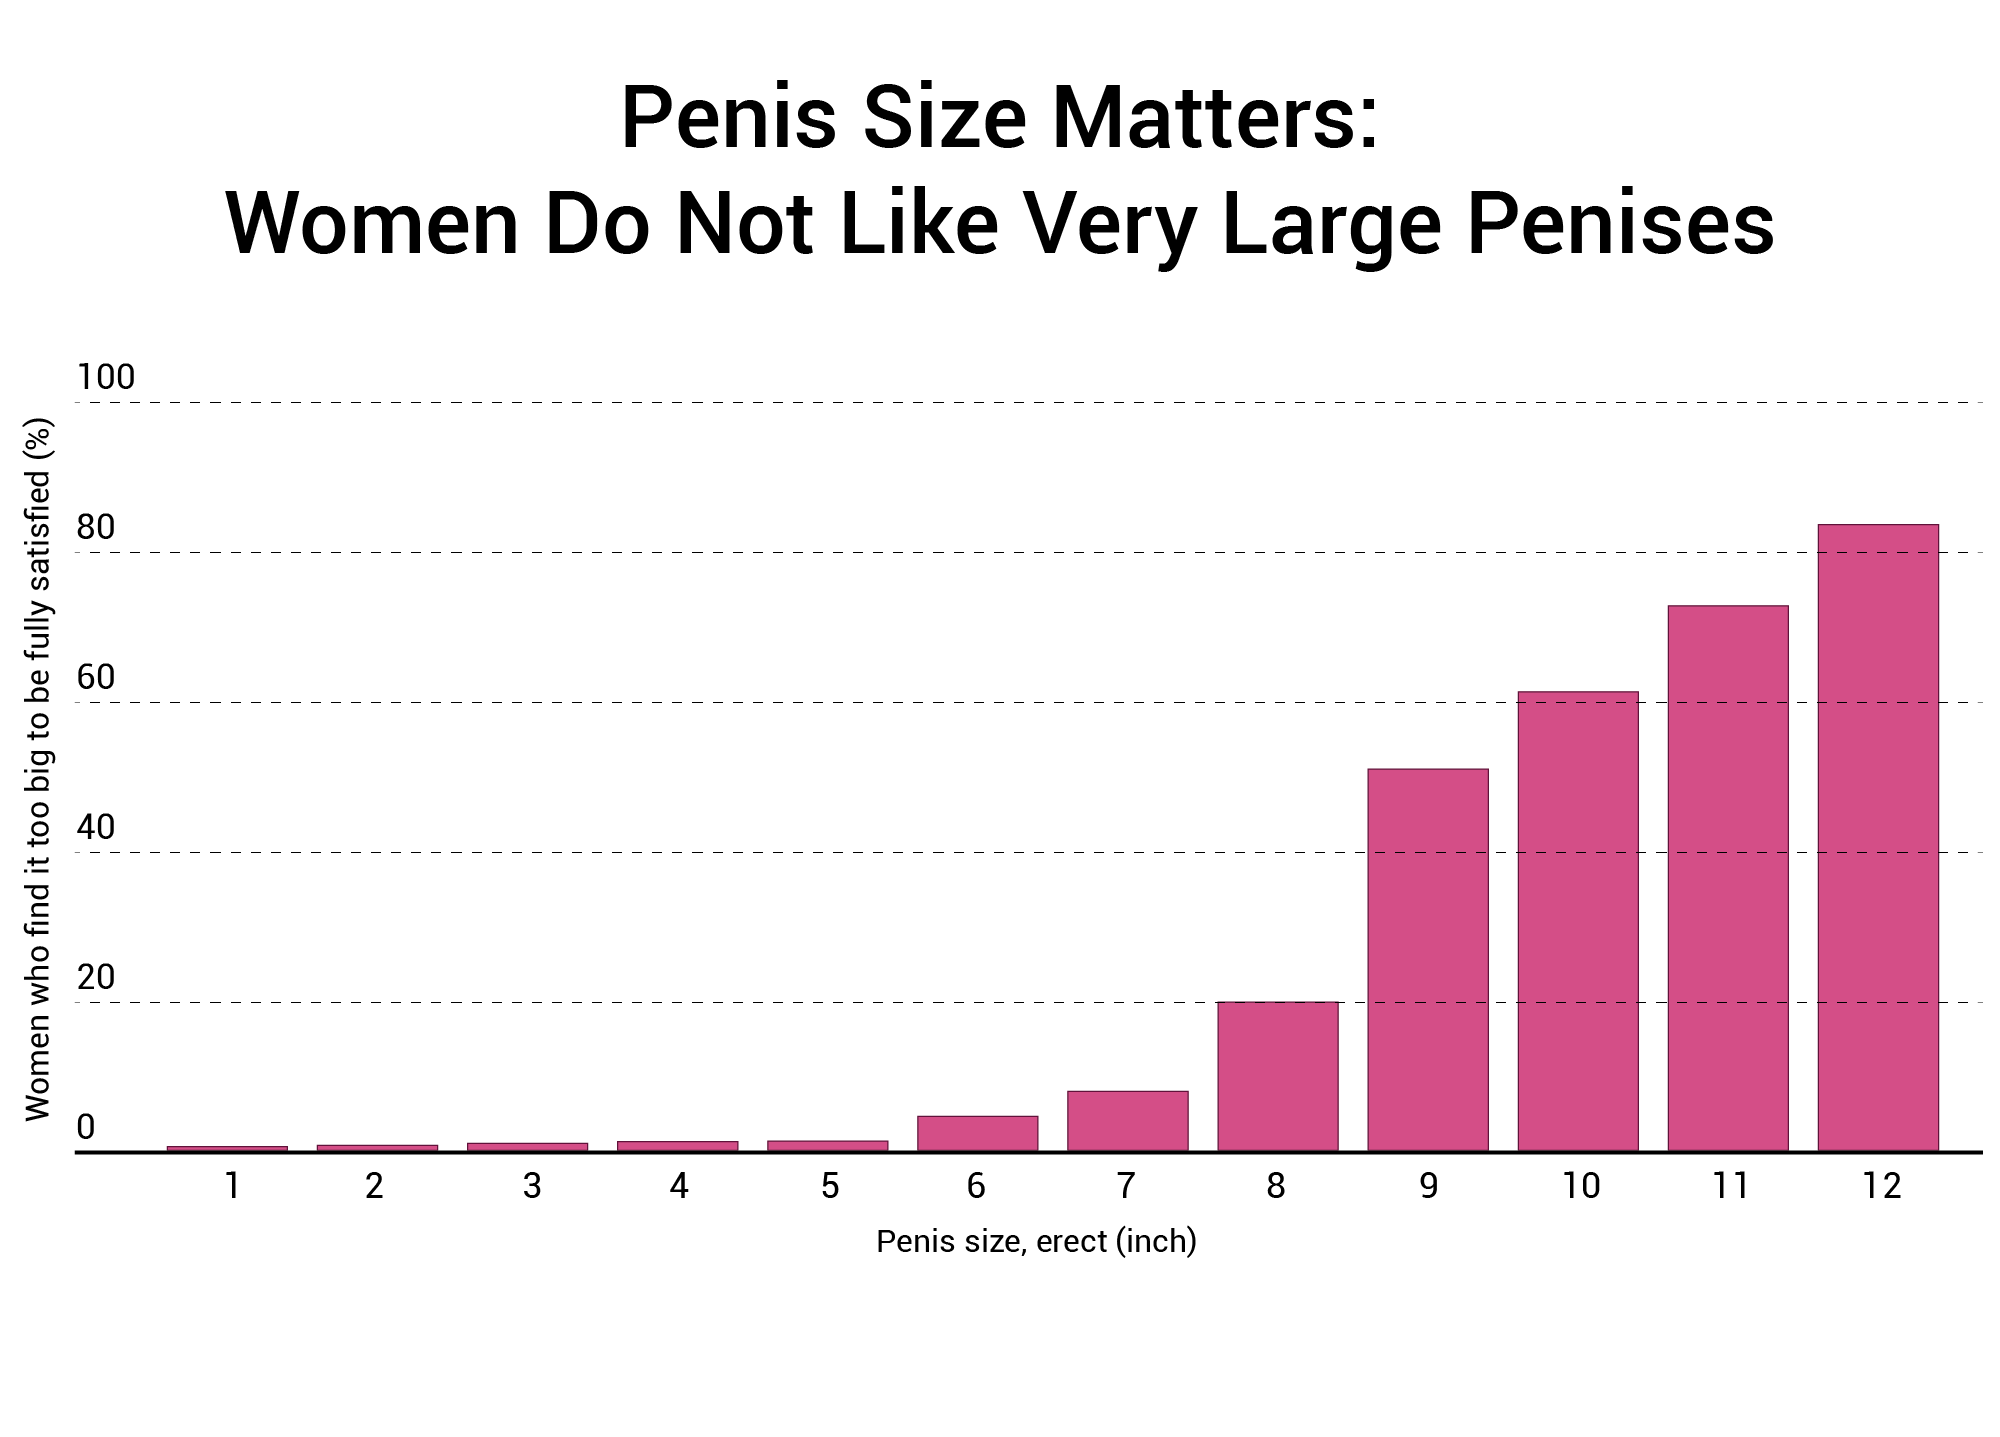 penis-size-matters-women-do-not-like-very-large-penises.png